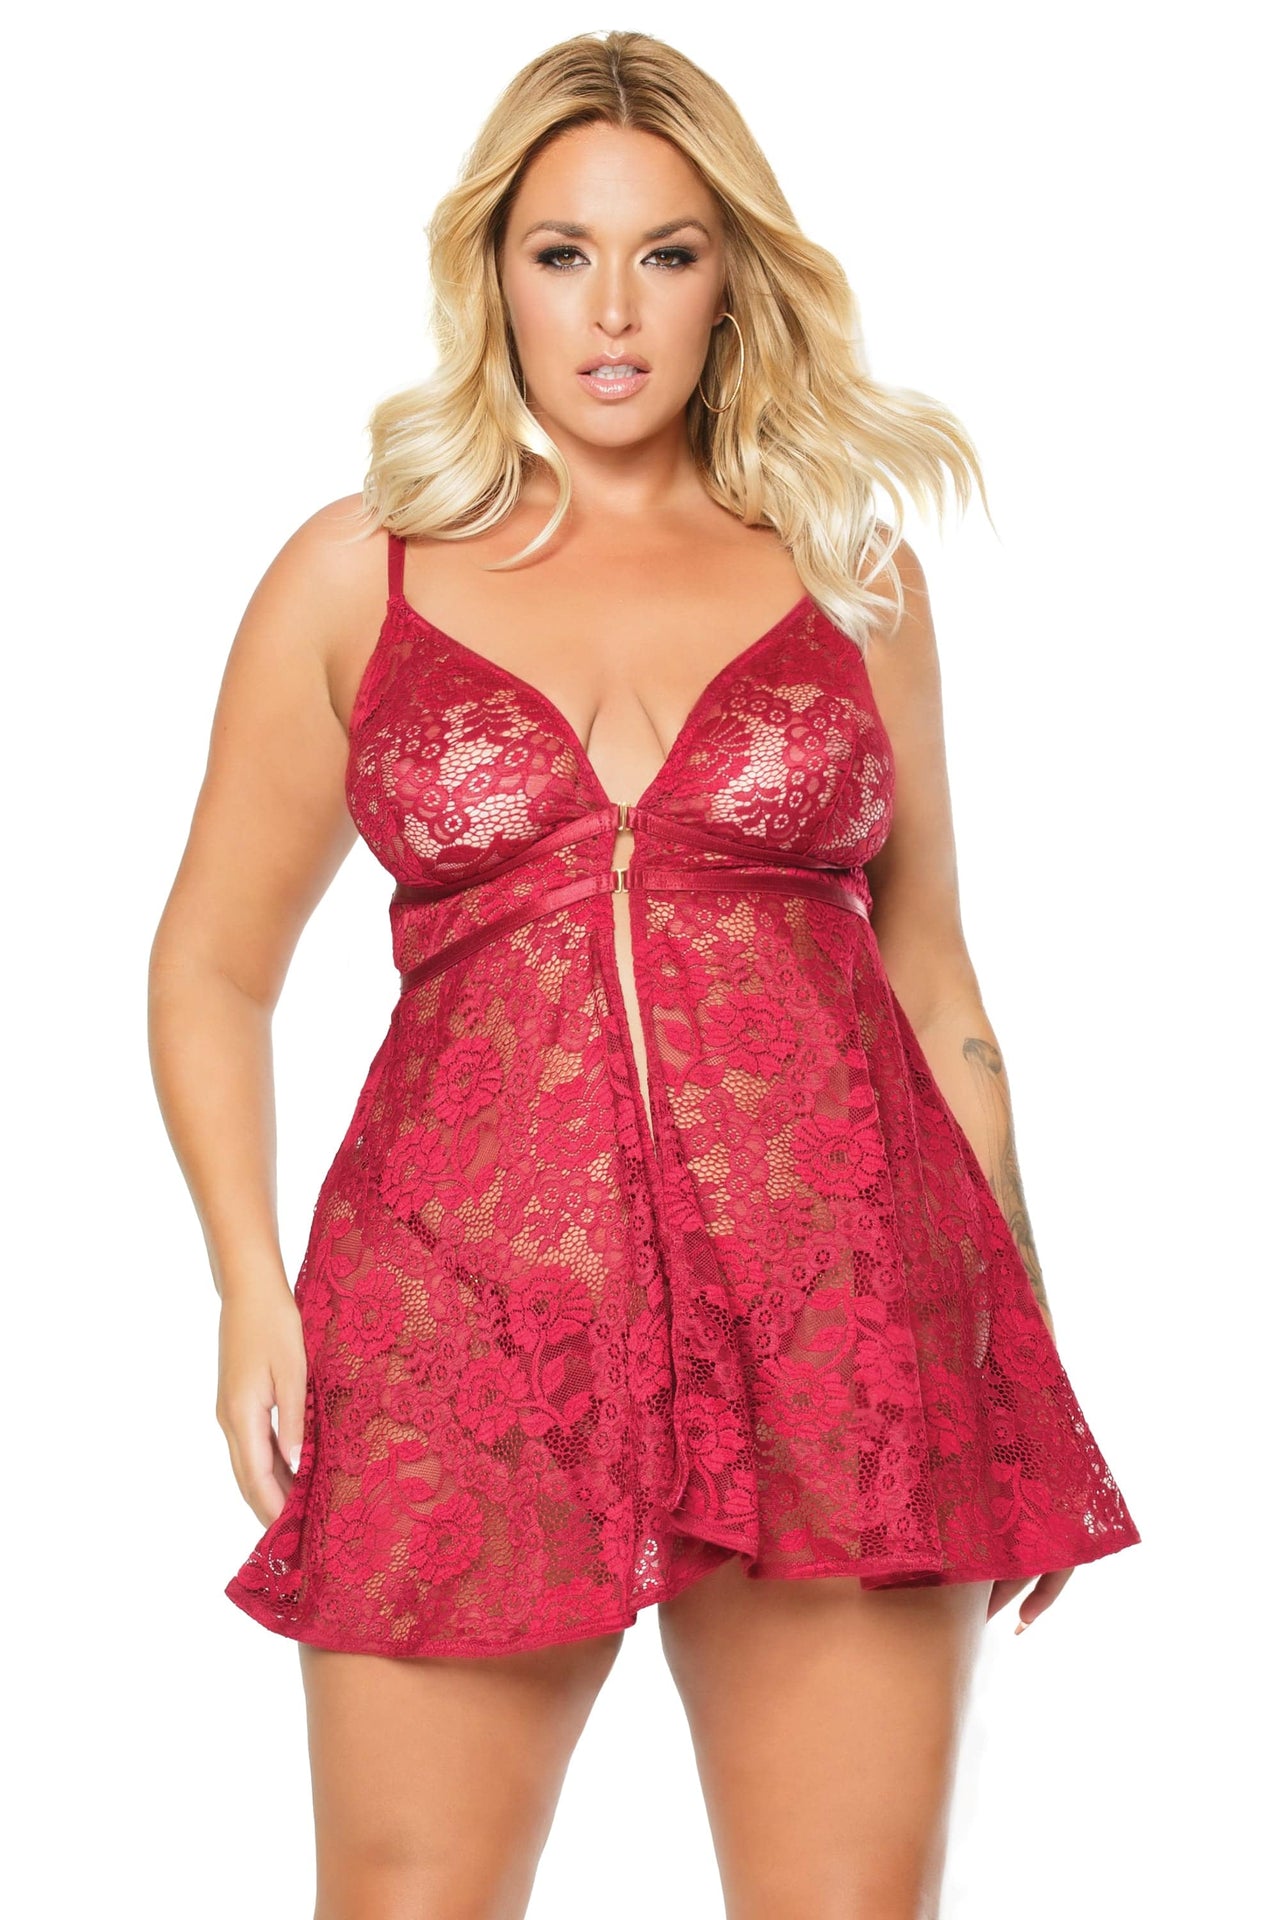 Coquette - 22111 PLUS - Babydoll & Thong Set - Ruby Red - OS/XL - Stag Shop